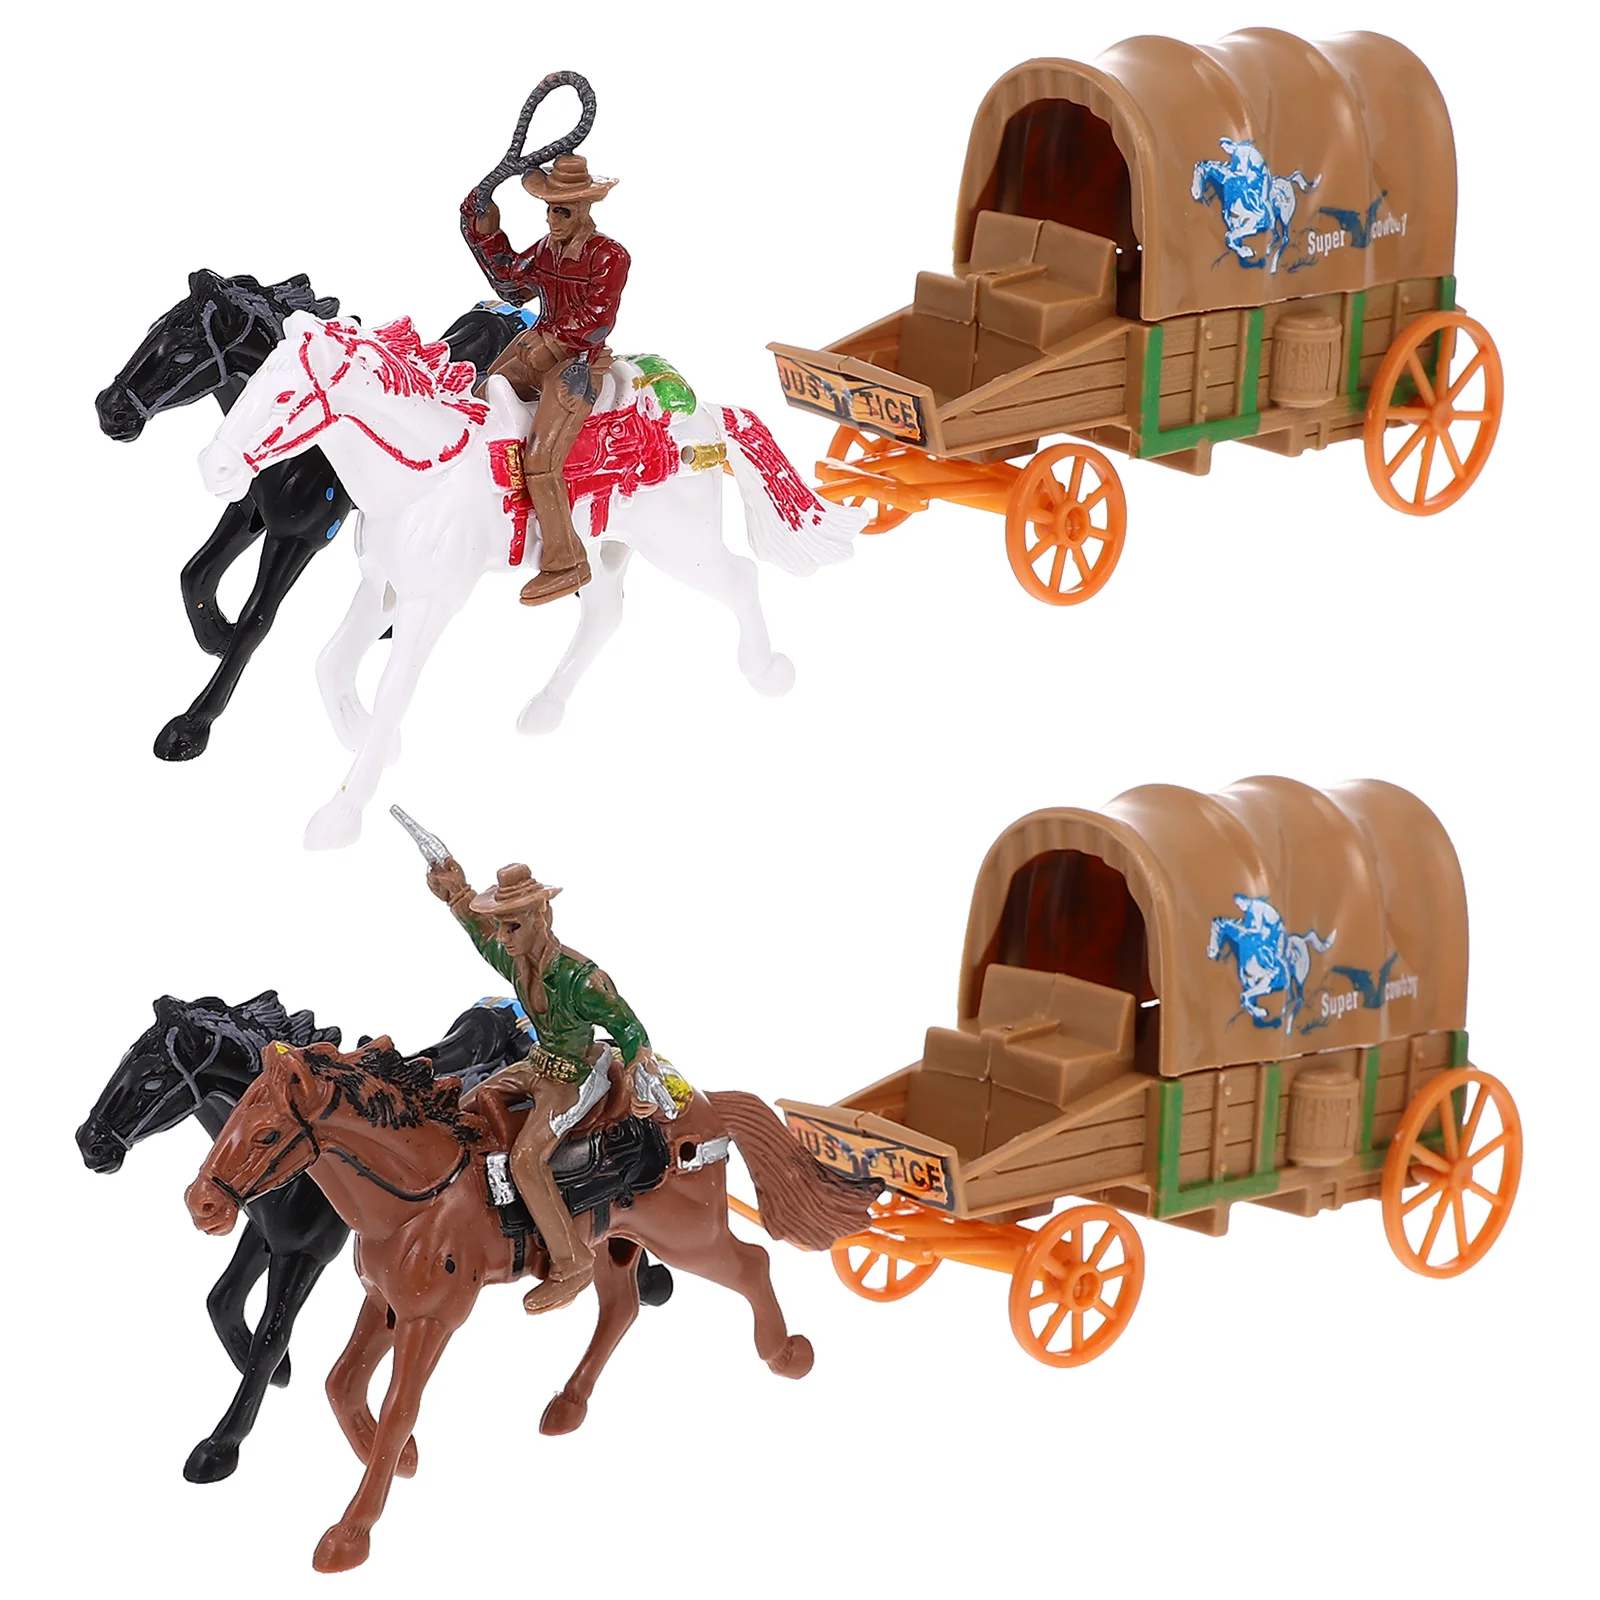 

2 Sets Cowboy Model Toy Western Carriage Culture Collection Toys Educational Home Accents Decor Statue Decorations